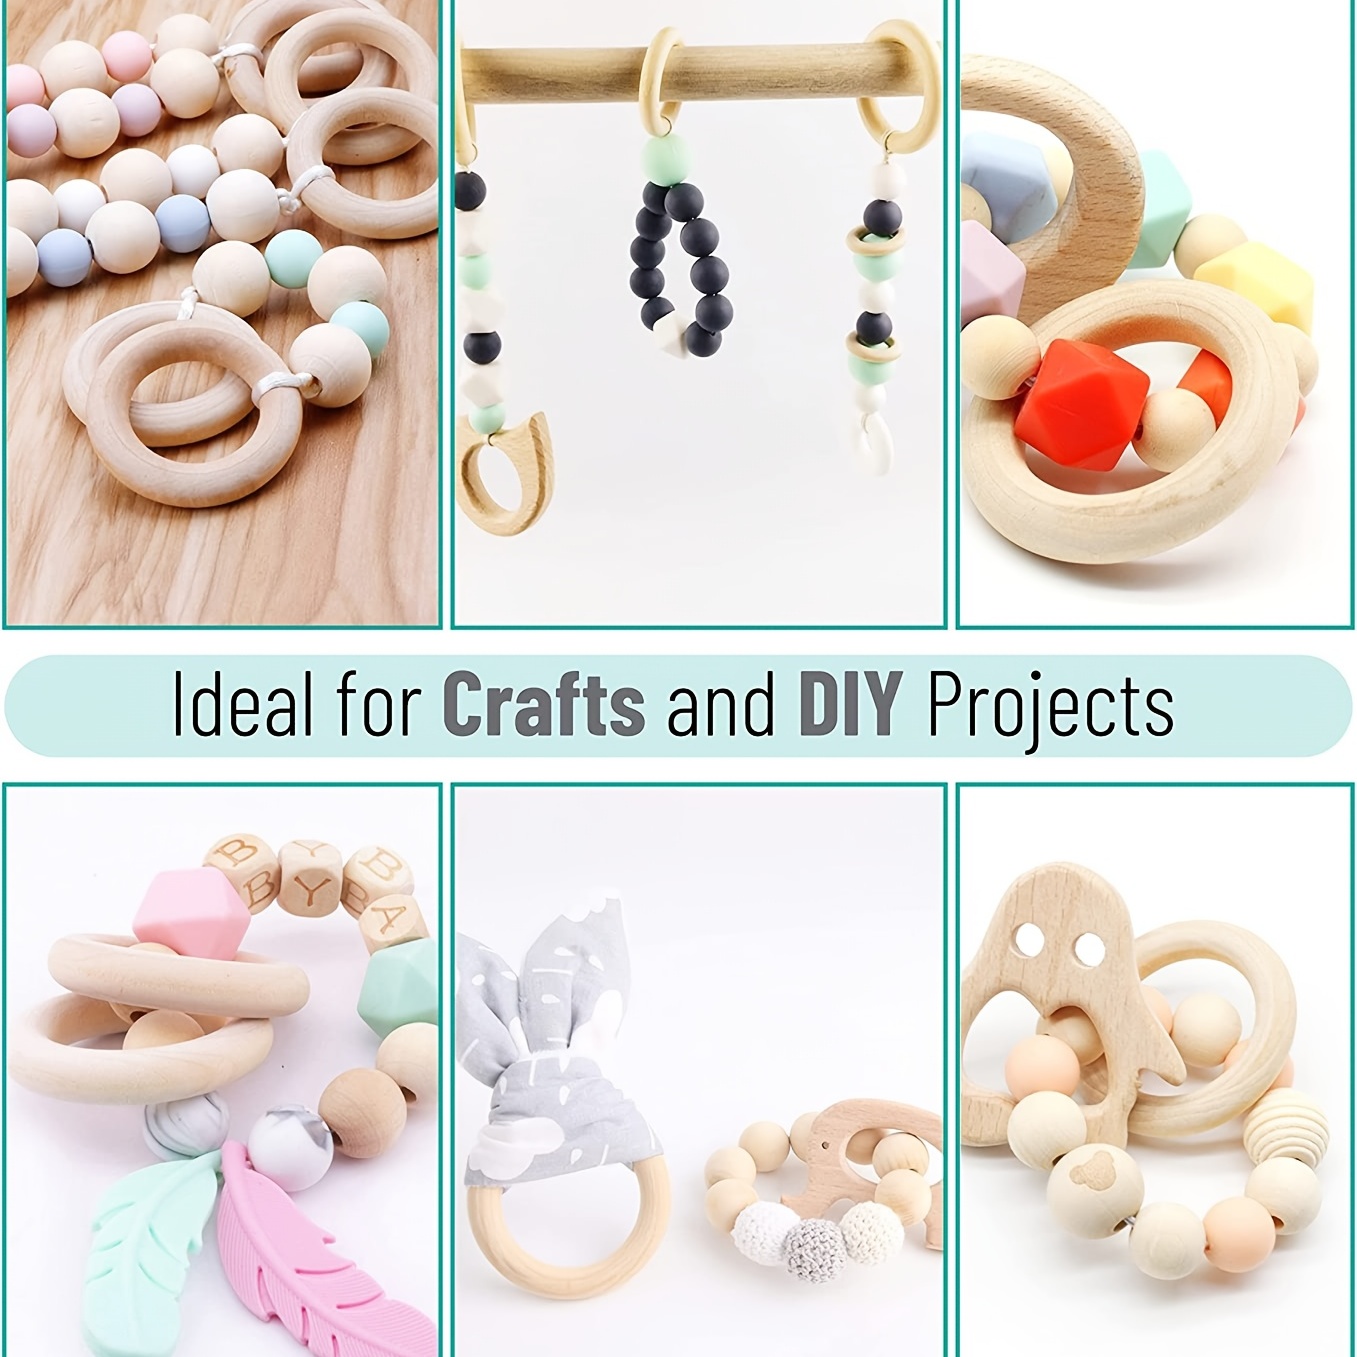 3 diy wooden ring craft ideas: easy and awesome crafts with wooden